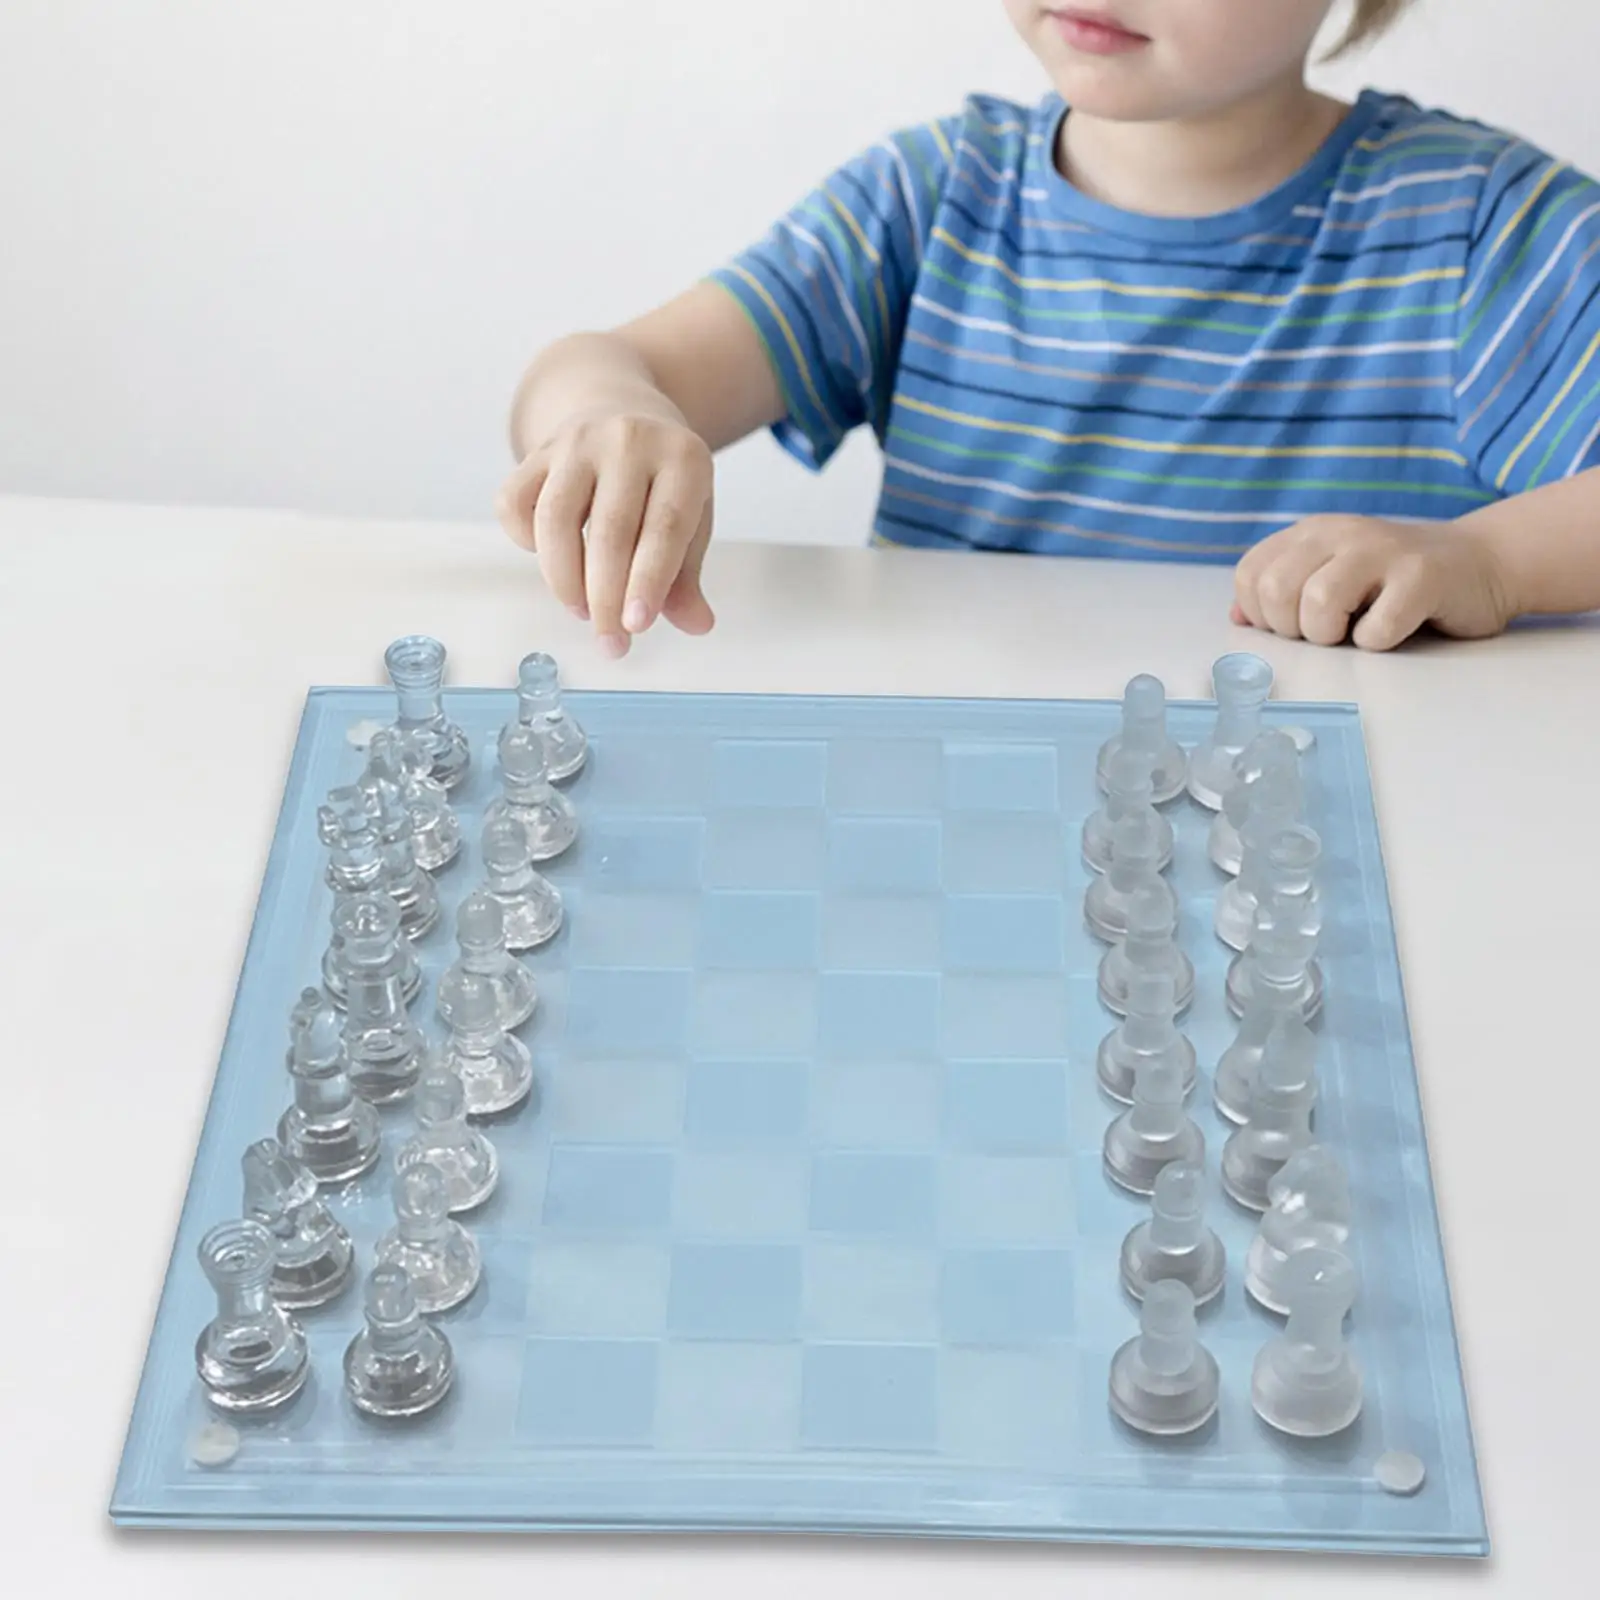 Classic Strategy Game Portable Early Education Frosted Chess Set Chess Set for Adult for Game Leisure Camping Trips Interaction